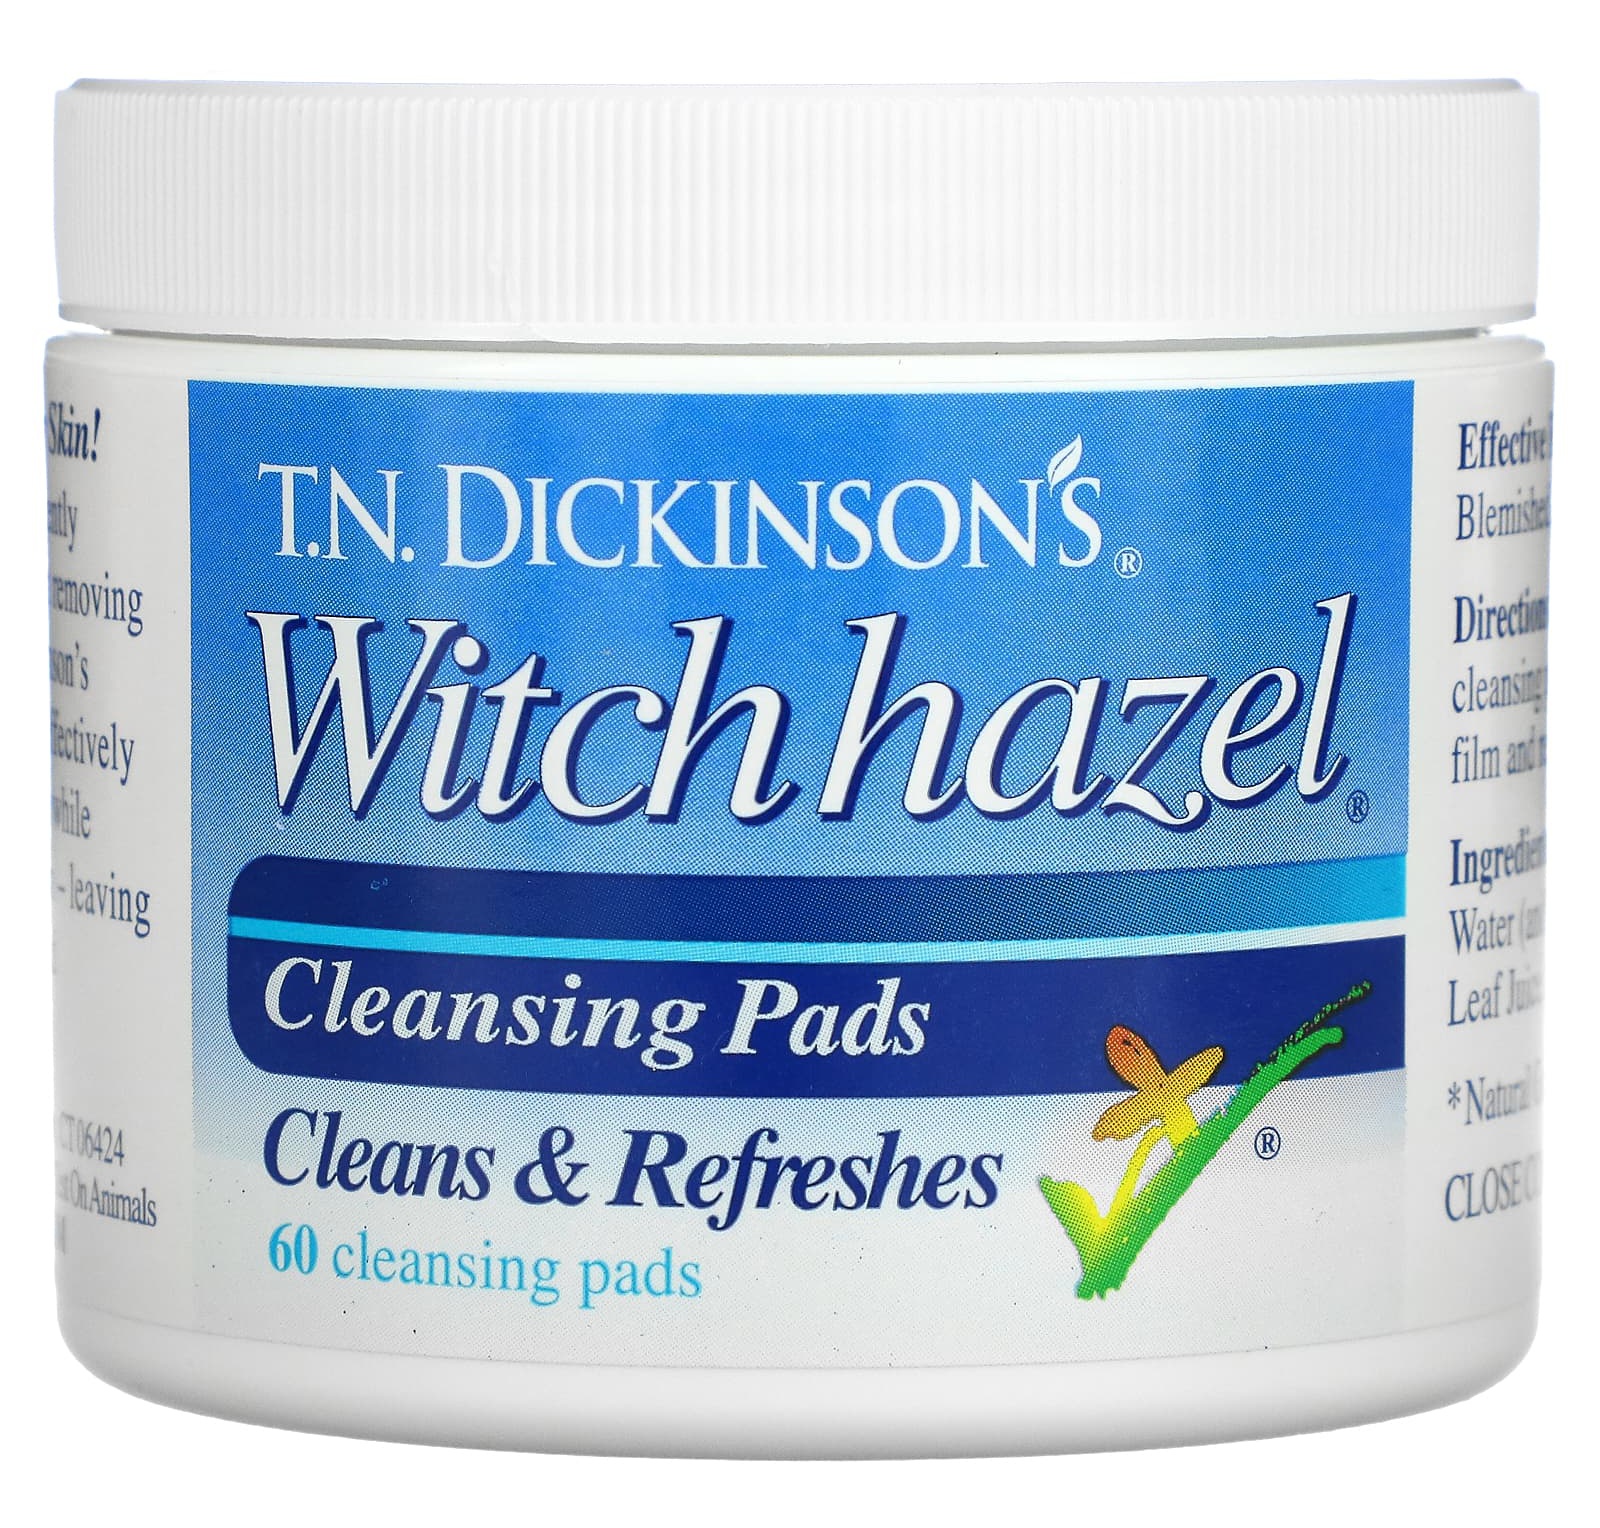 T.N. Dickinson's Witch Hazel Cleansing Pads